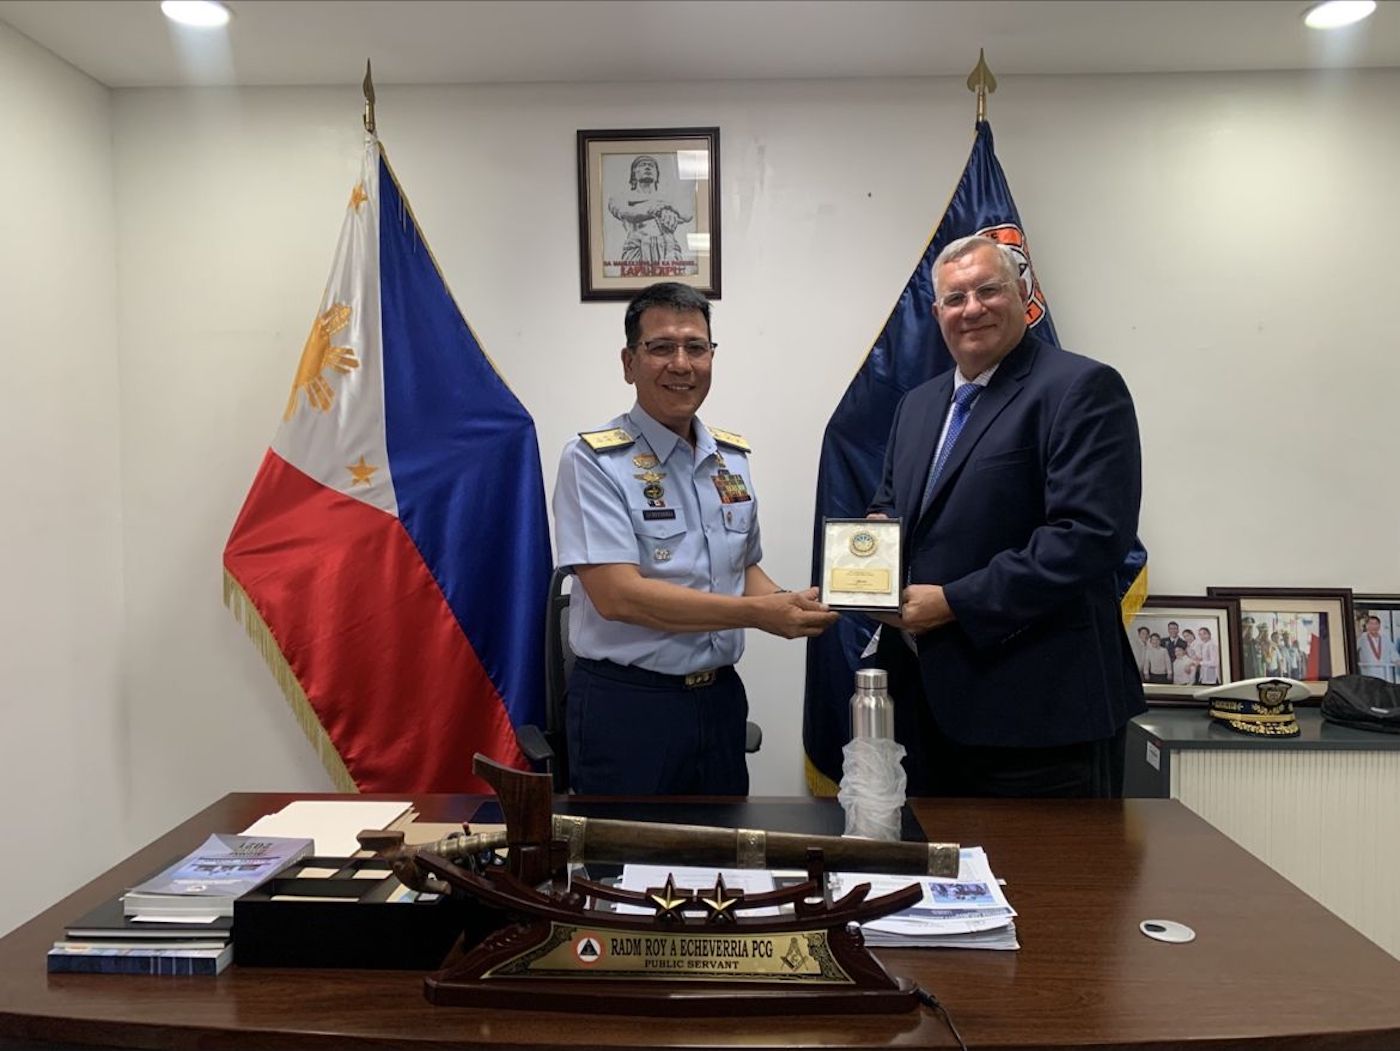 a picture of an officer handing an award to the man in a navy suit with the Philippines flag in the background